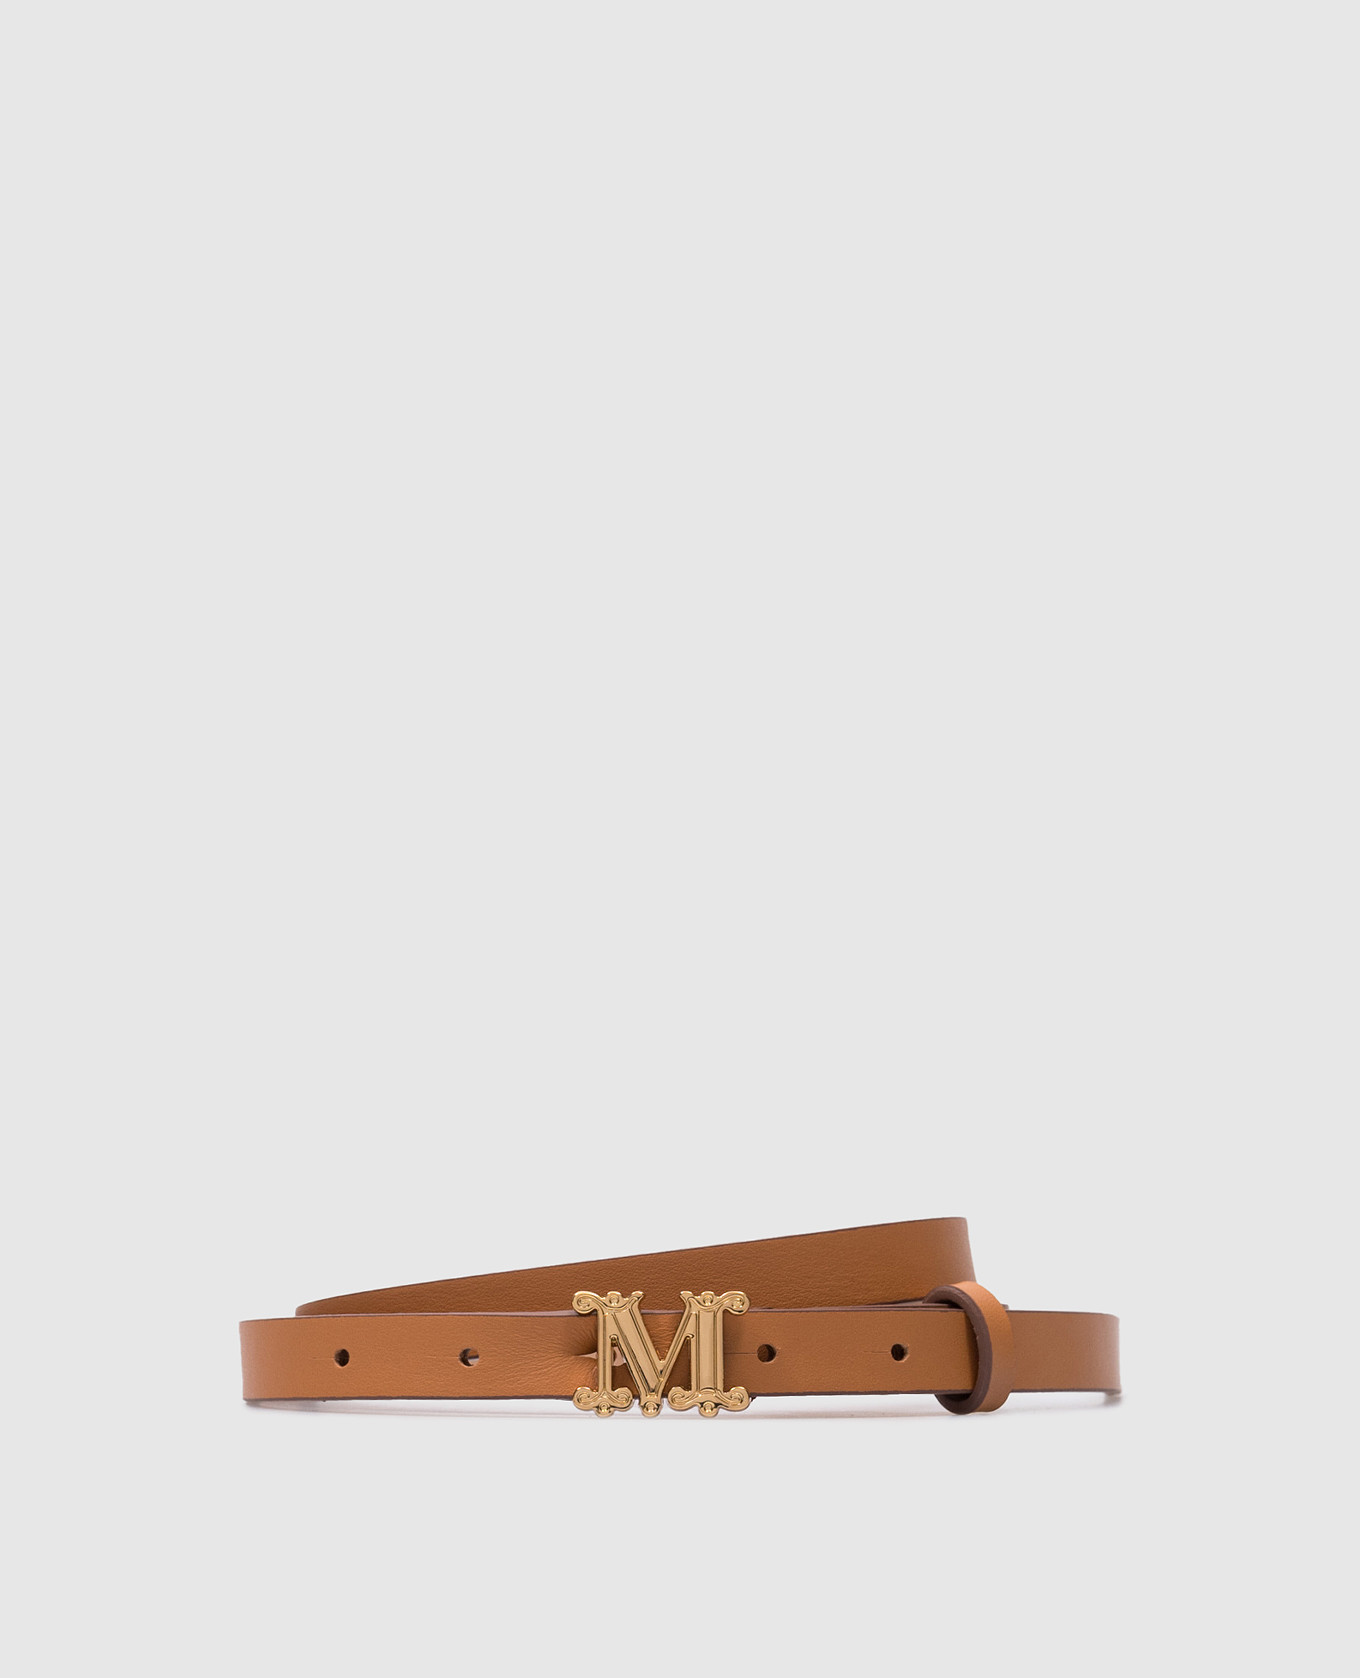 MGRAZIATA brown leather belt with metal logo